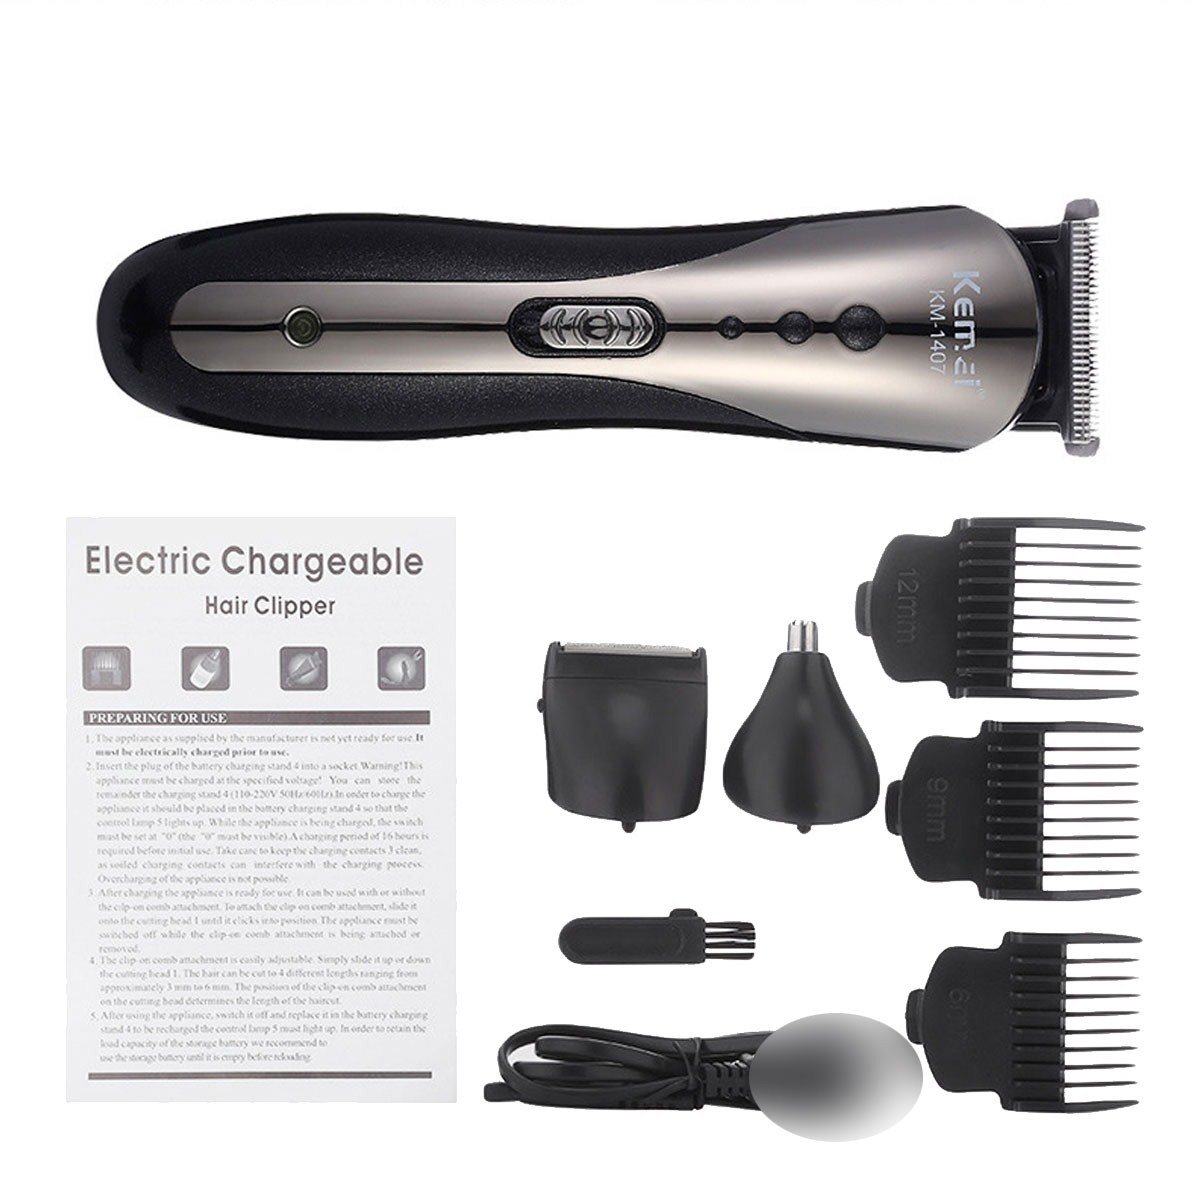 

Electric 3 In 1 Hair Clipper Nose Trimmer Beard Body Shaver Grooming Razor Kit Hair Styling Tool